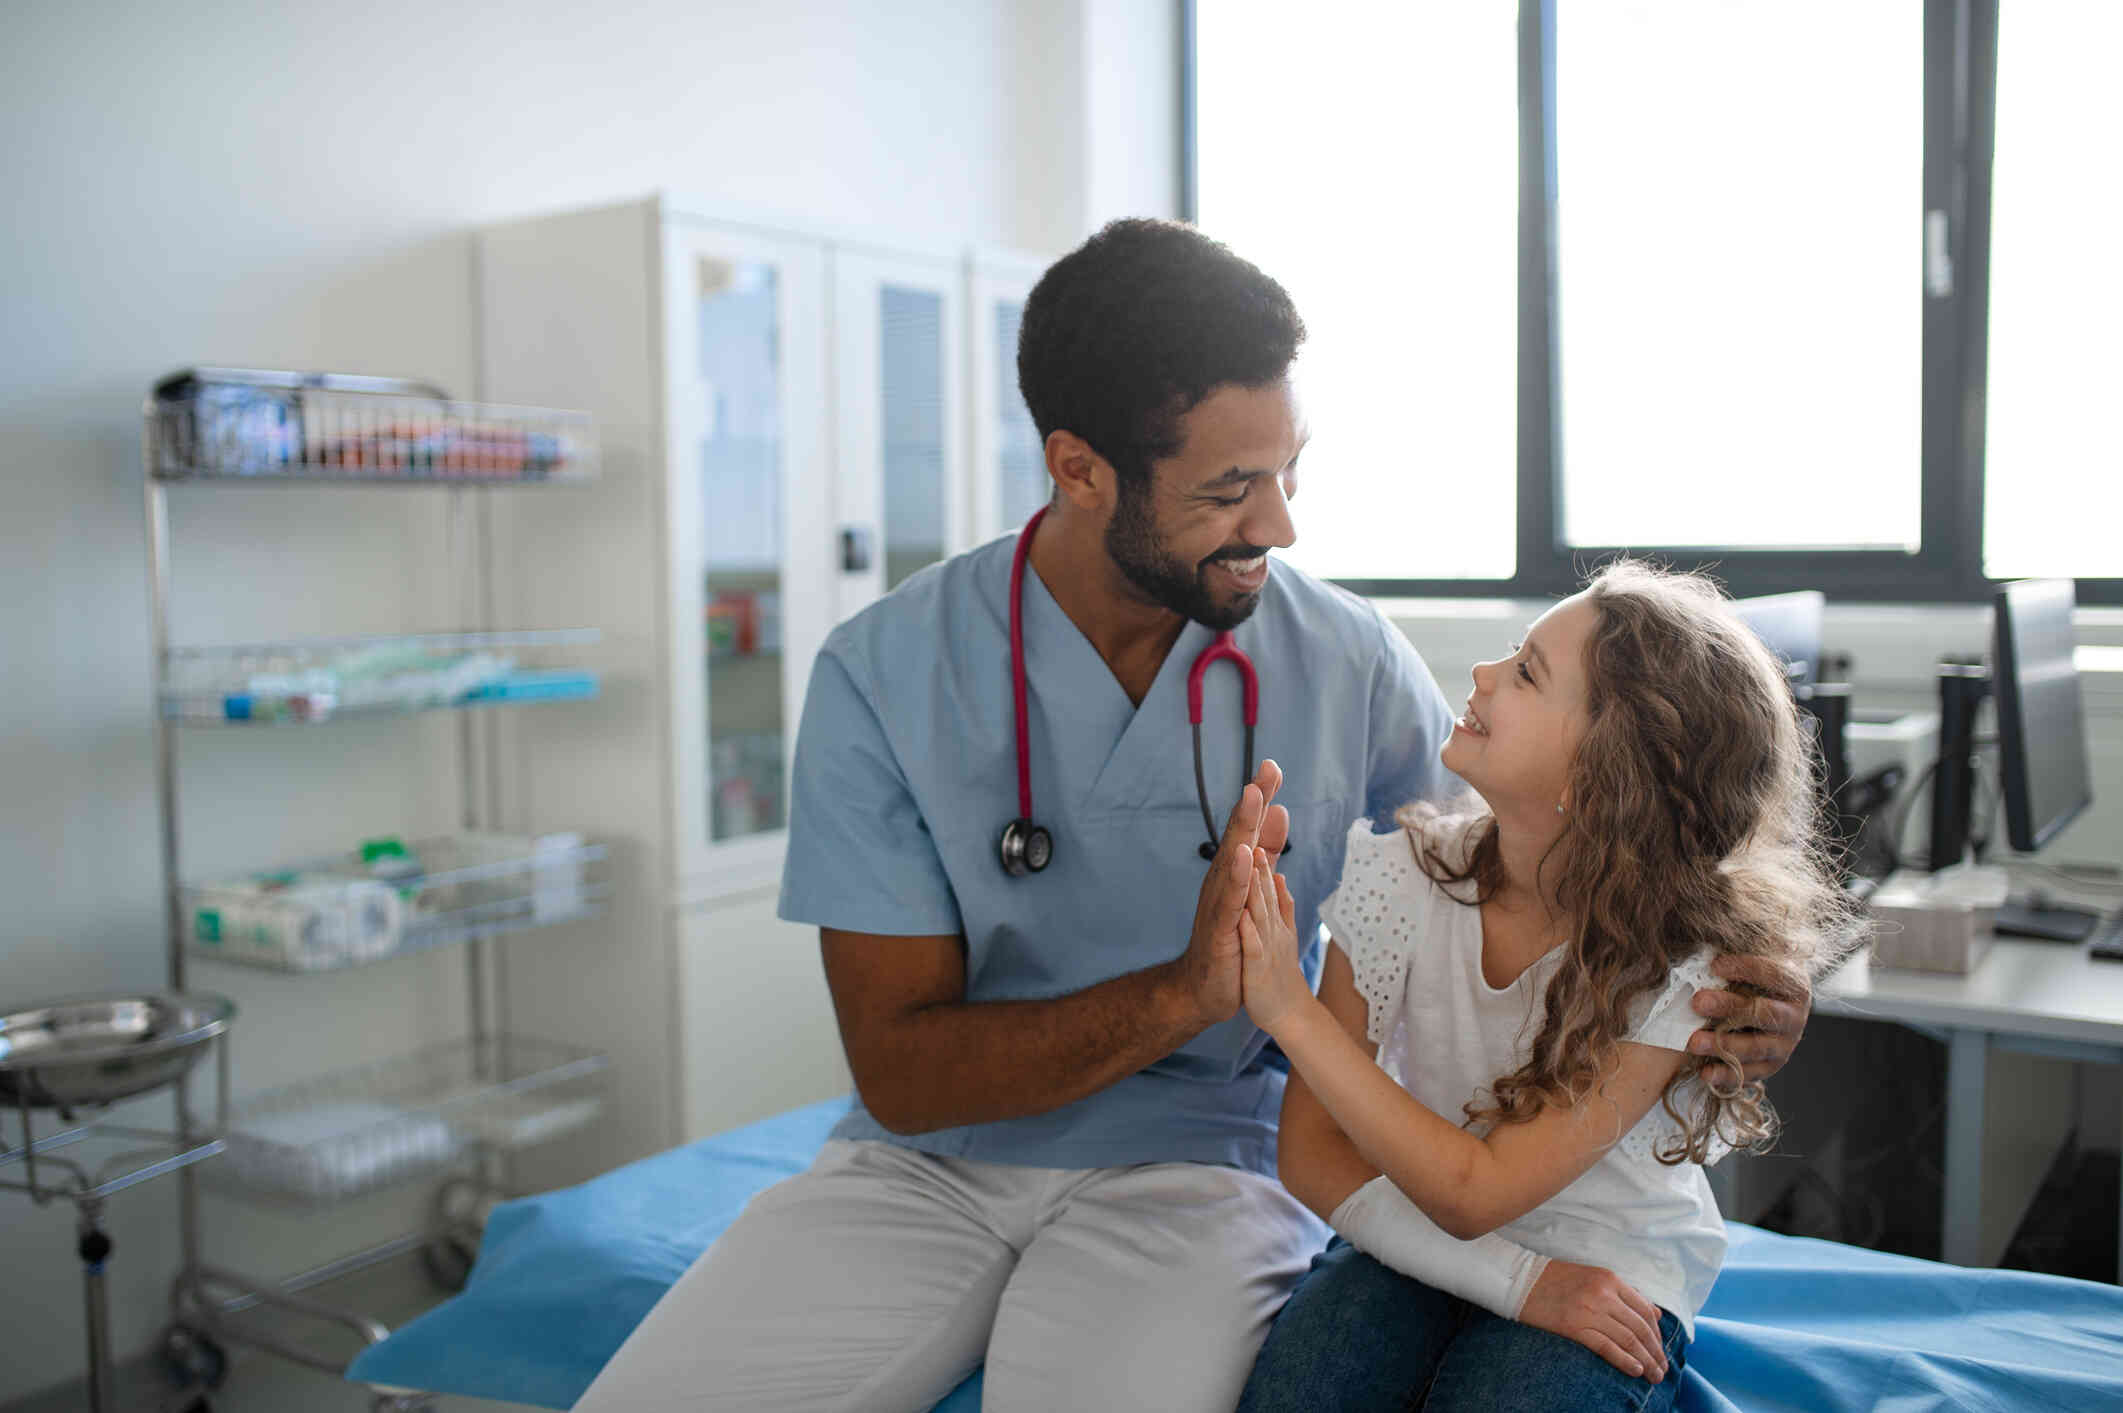 A man in scrubs sits next to a young girl in a doctors office and smiles as they high-five.